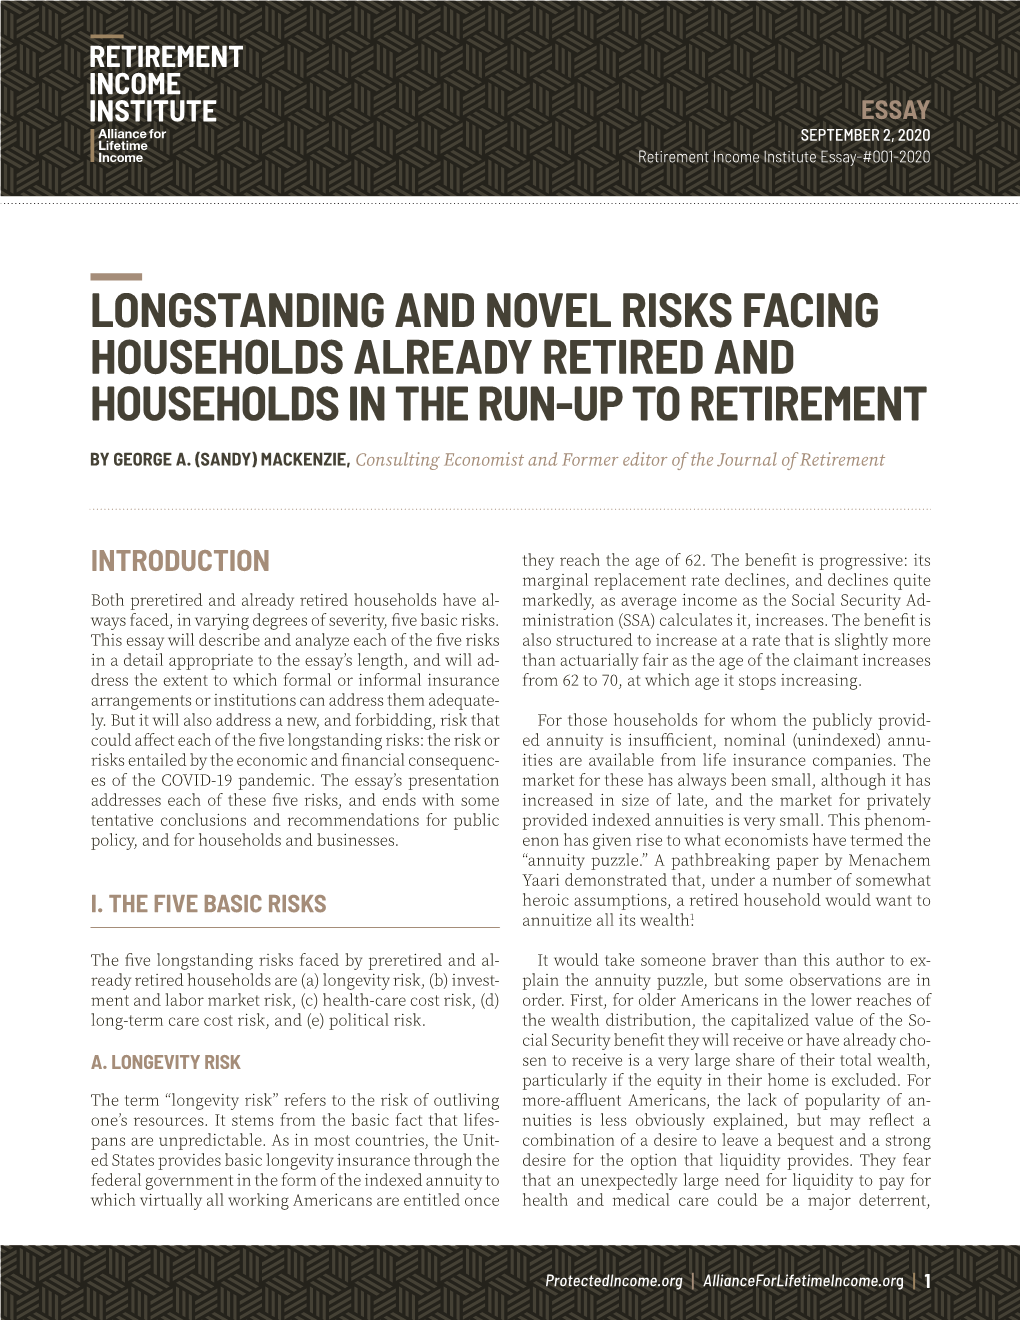 Longstanding and Novel Risks Facing Households Already Retired and Households in the Run-Up to Retirement